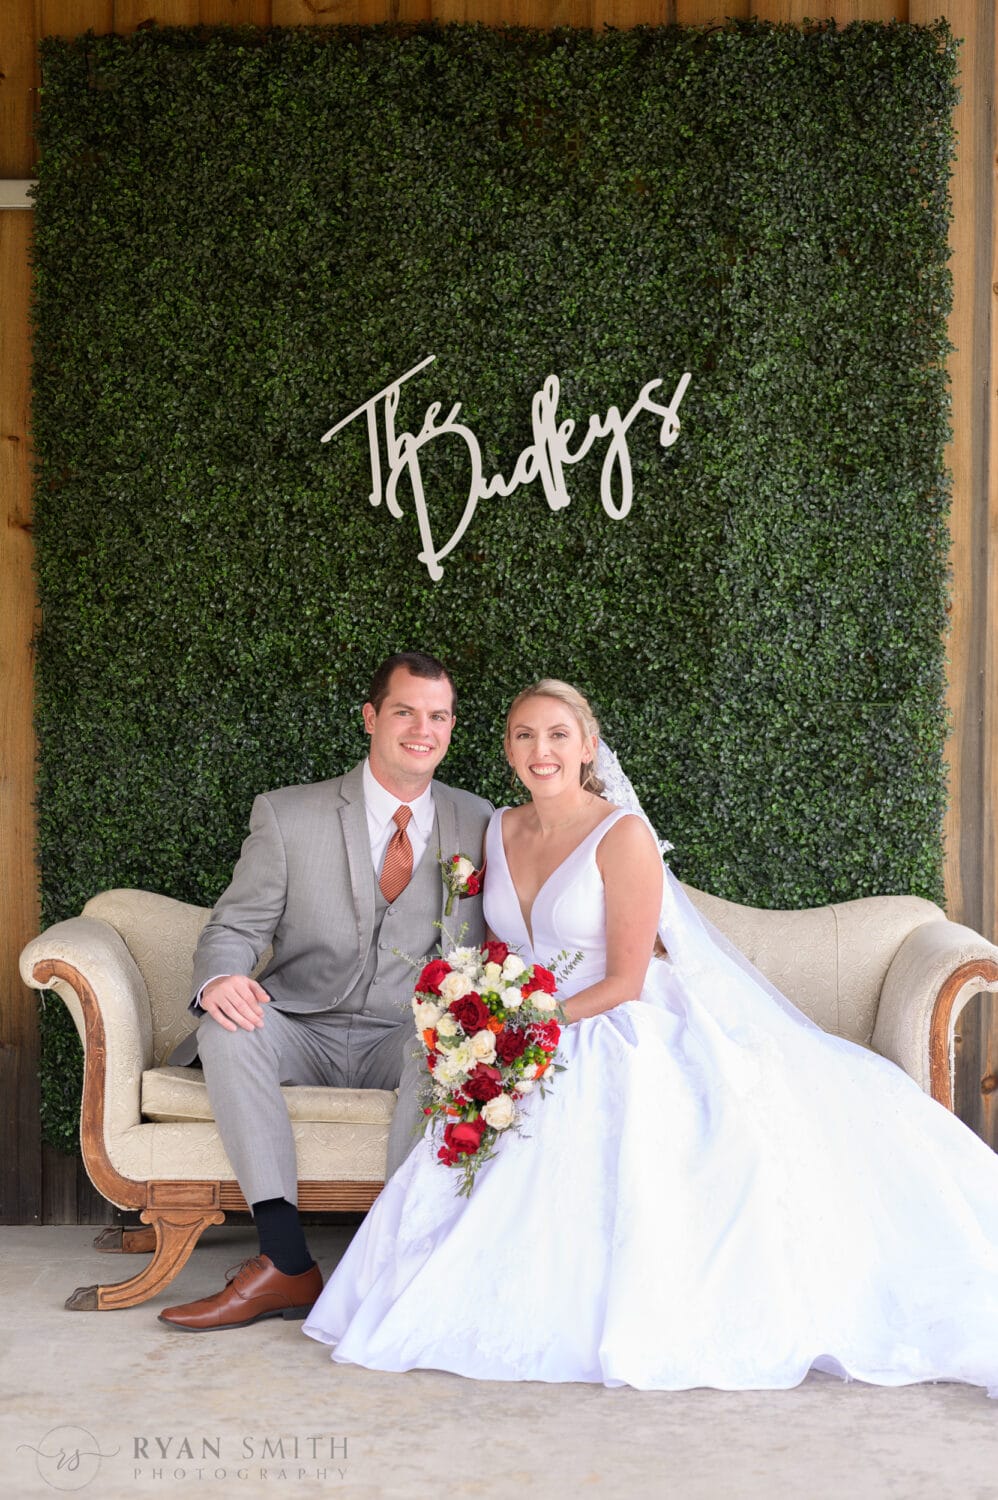 Bride and groom on the couch under the ivy wall - The Blessed Barn